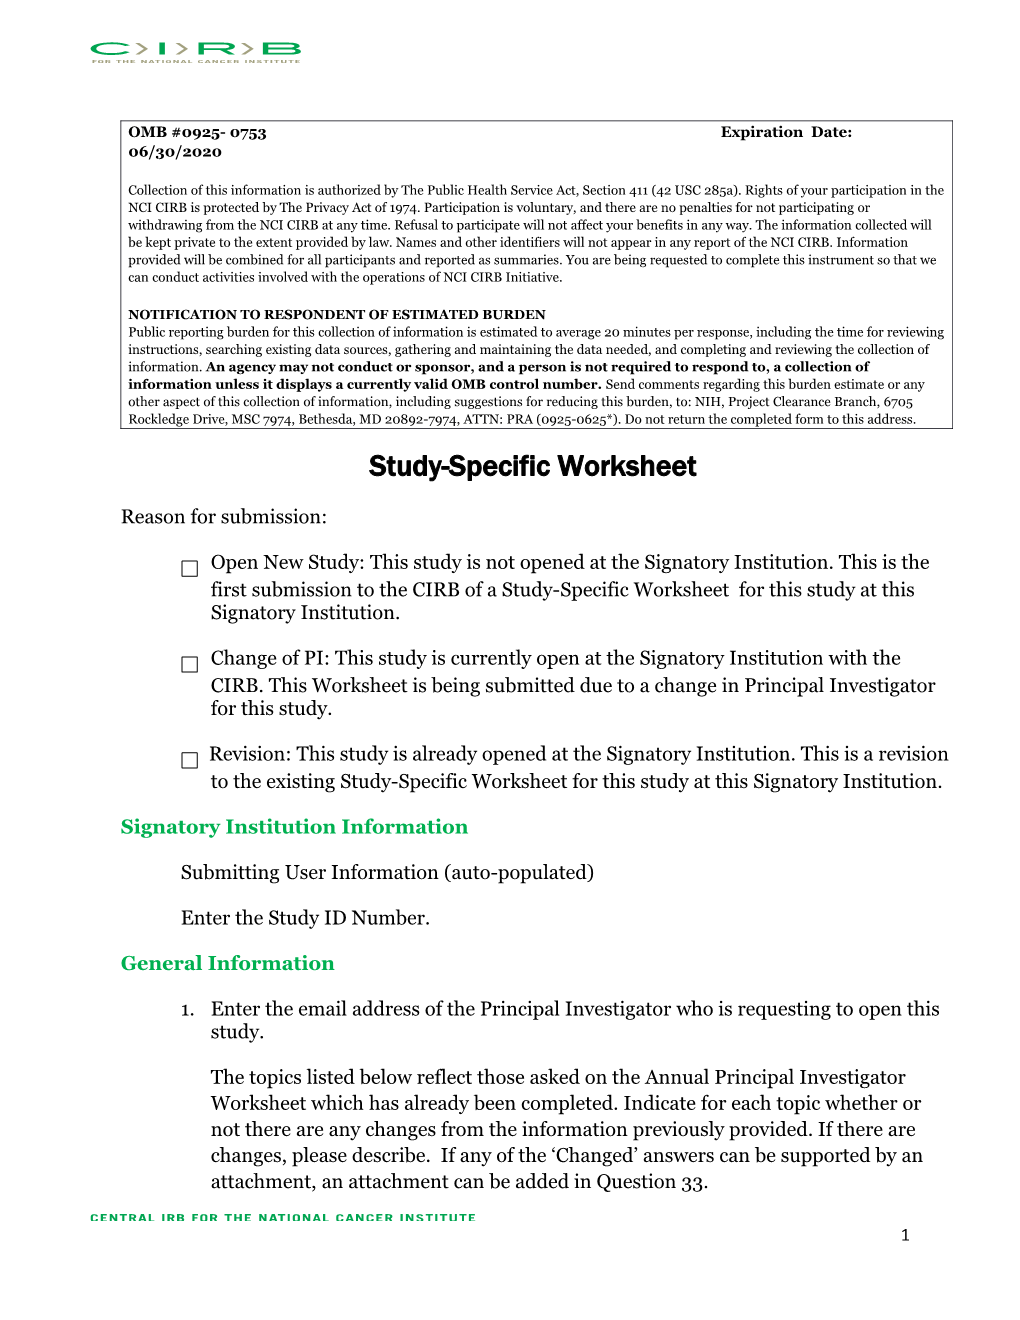 CIRB Annual Principal Investigator Worksheet About Local Context